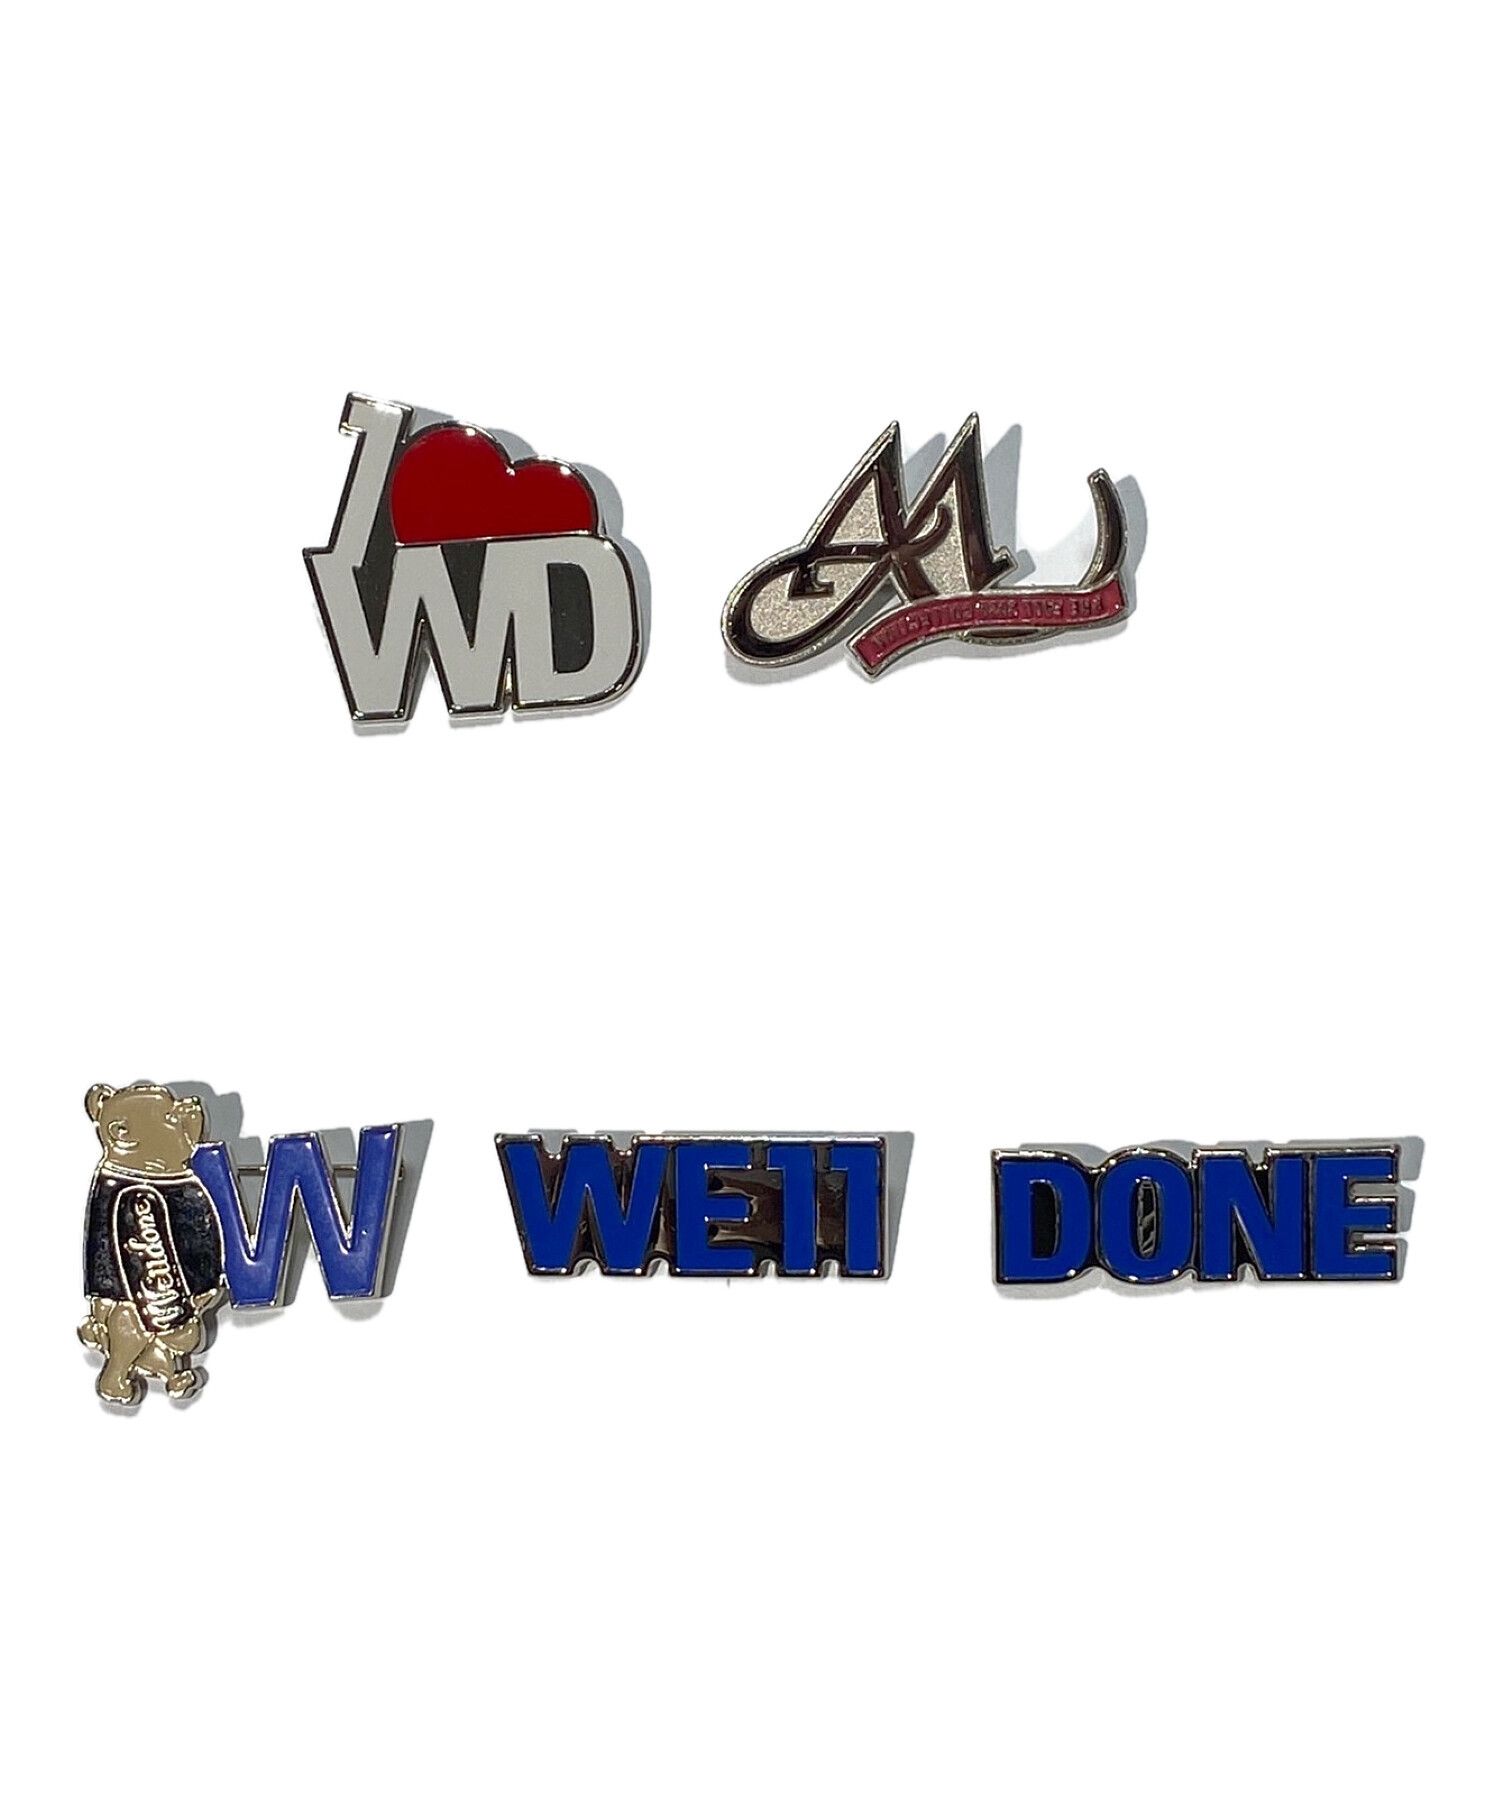 WE11DONE (ウェルダン) SET OF WE11DONE PINS